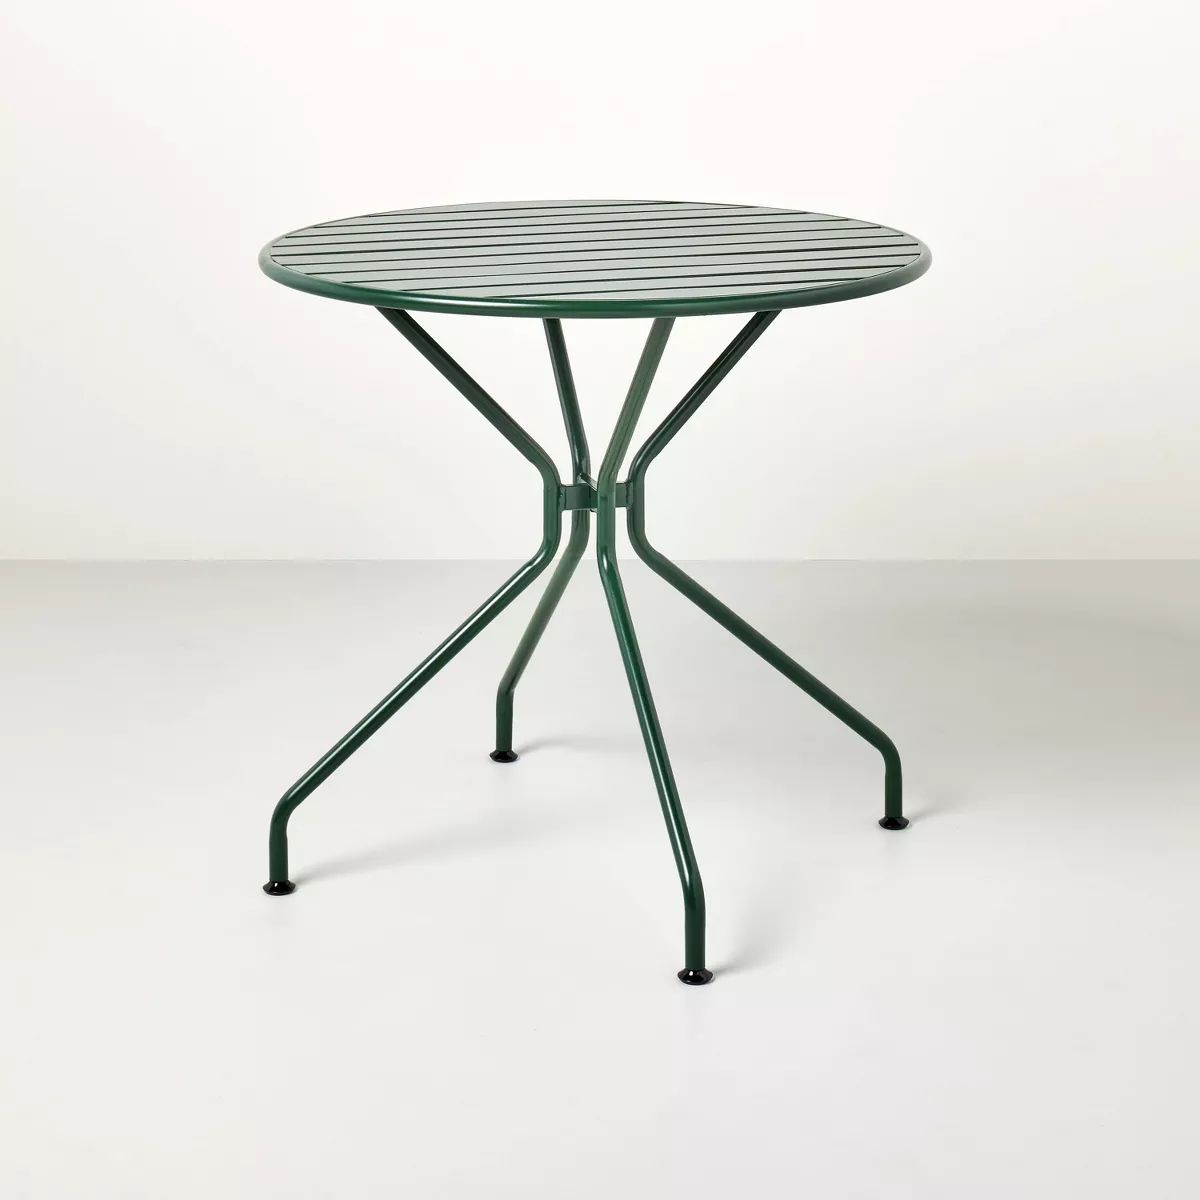 Slat Metal Round Outdoor Patio Bistro Table Green - Hearth & Hand™ with Magnolia | Target